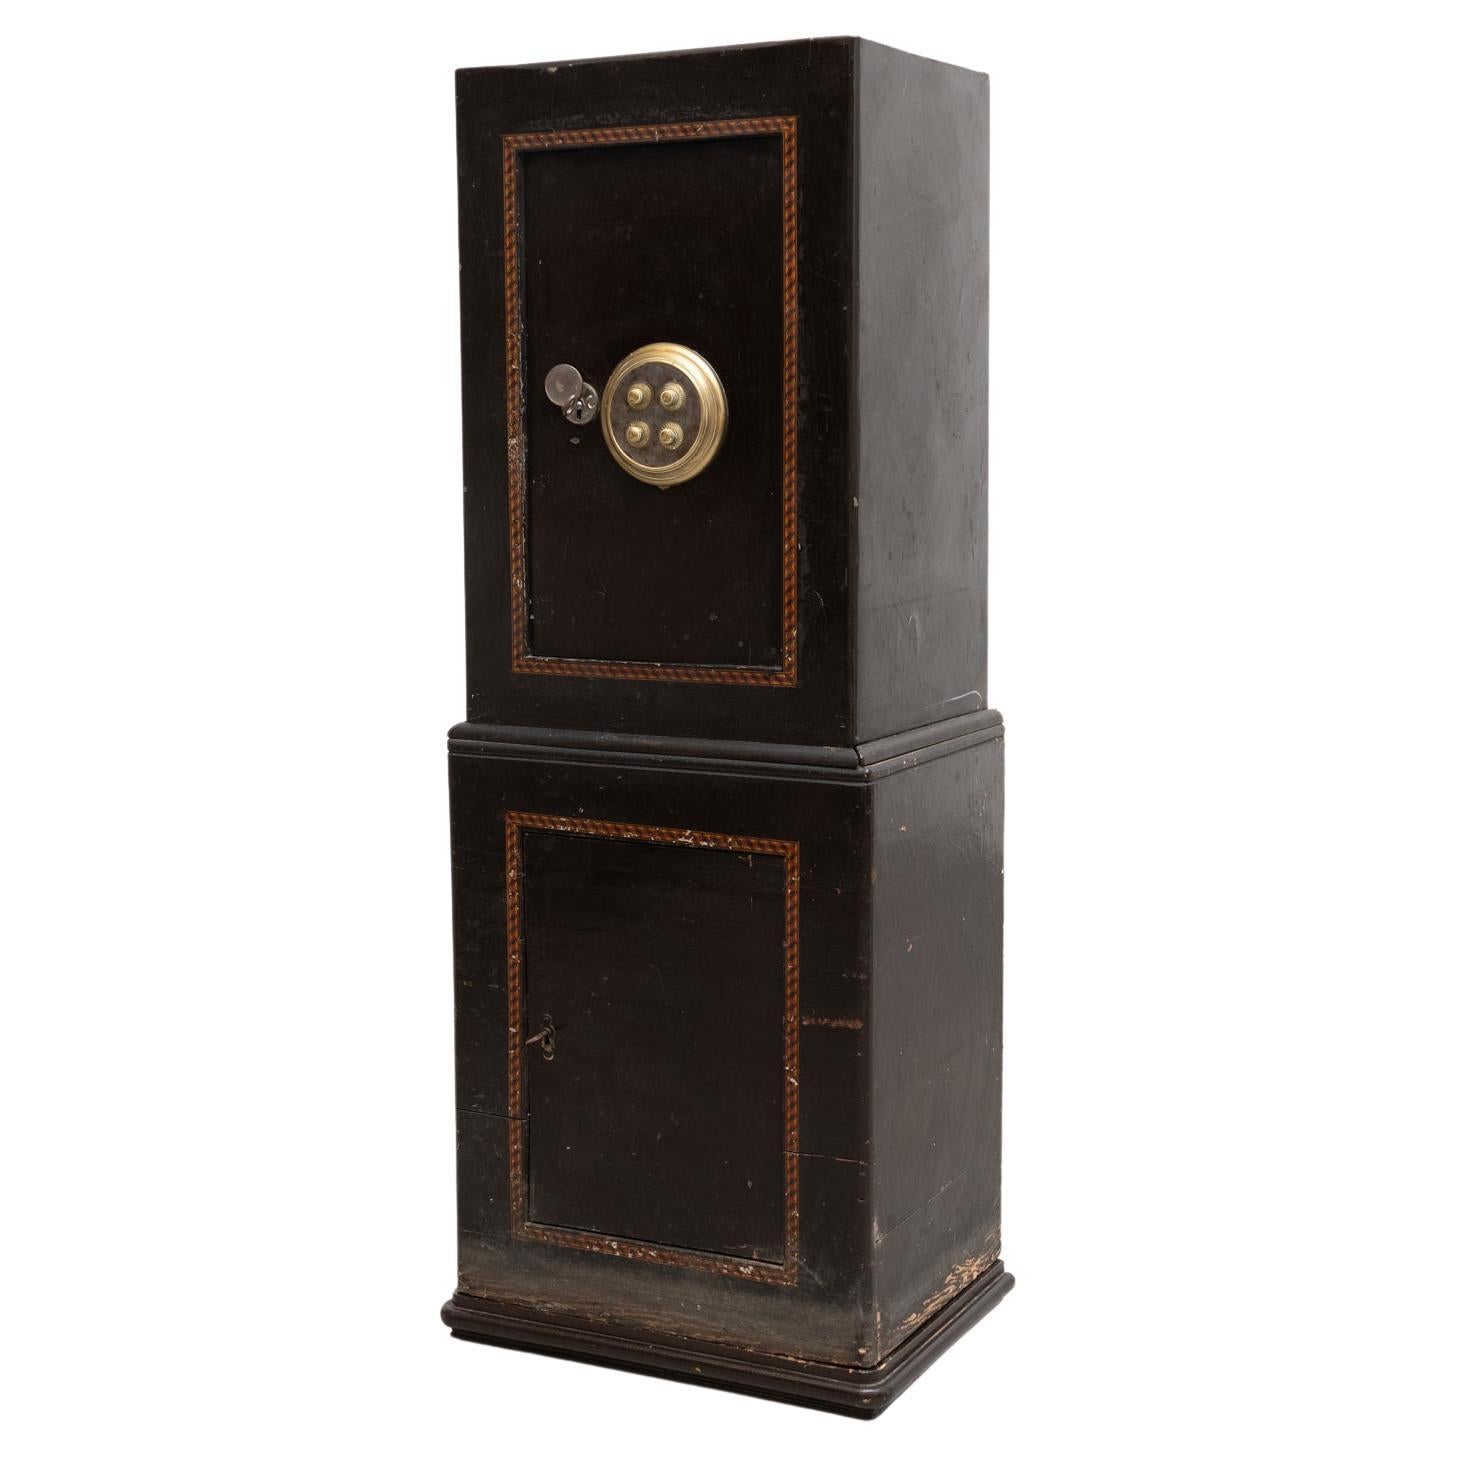 Vintage safe box manufactured by an unknown designer.

Not working, to be used as a decorative case or to be restorated,

Manufactured in Spain, circa 1960.

Materials:
Wood
Metal

In good original condition, with minor wear consistent with age and